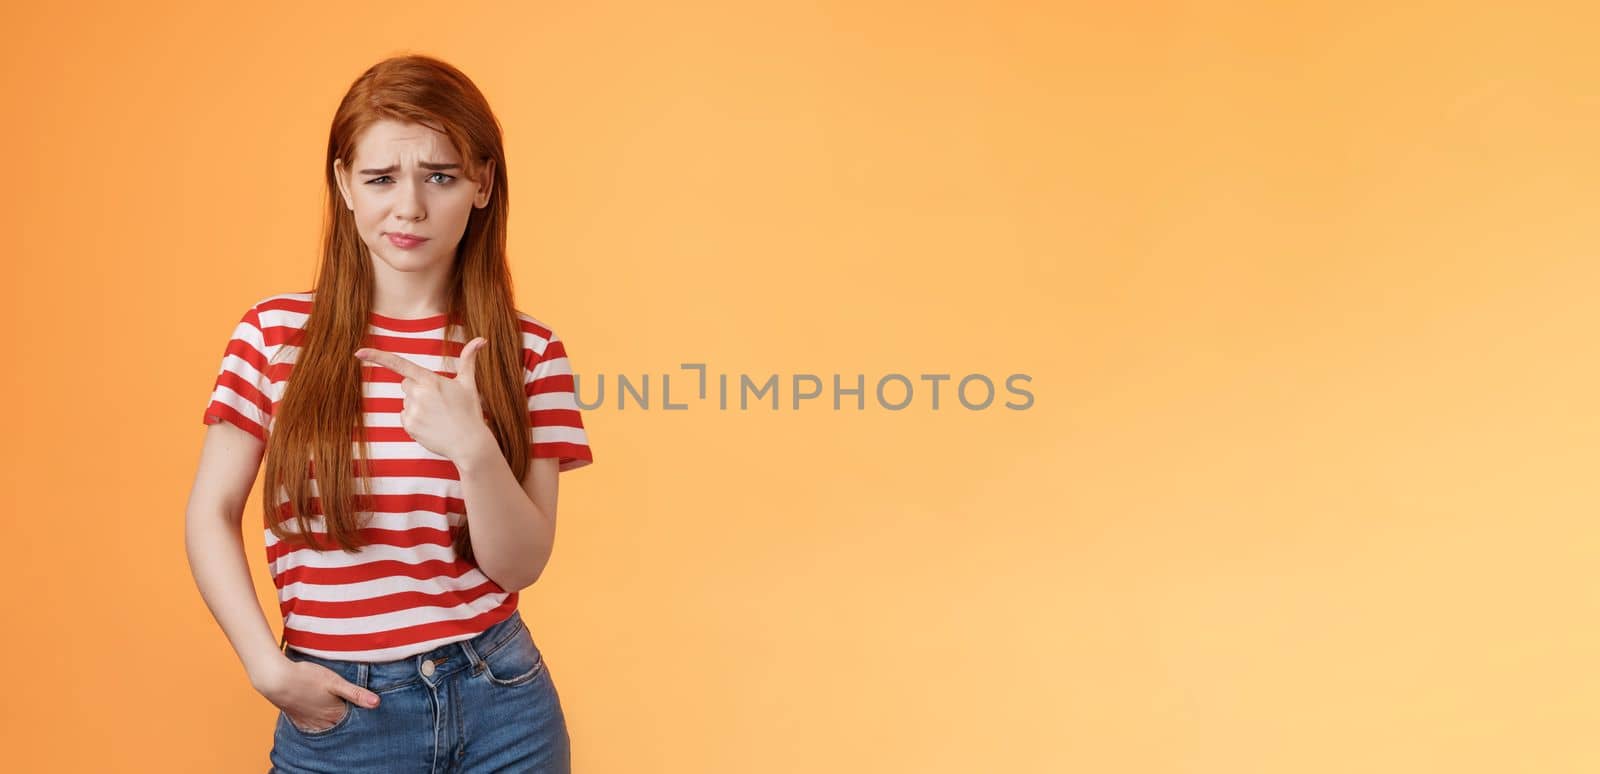 Upset uneasy cute ginger gitl long natural red hair, frowning smirking hesitant, complain, looking suspicious and doubtful point left, not sure if product really good, feel unsure, orange background.